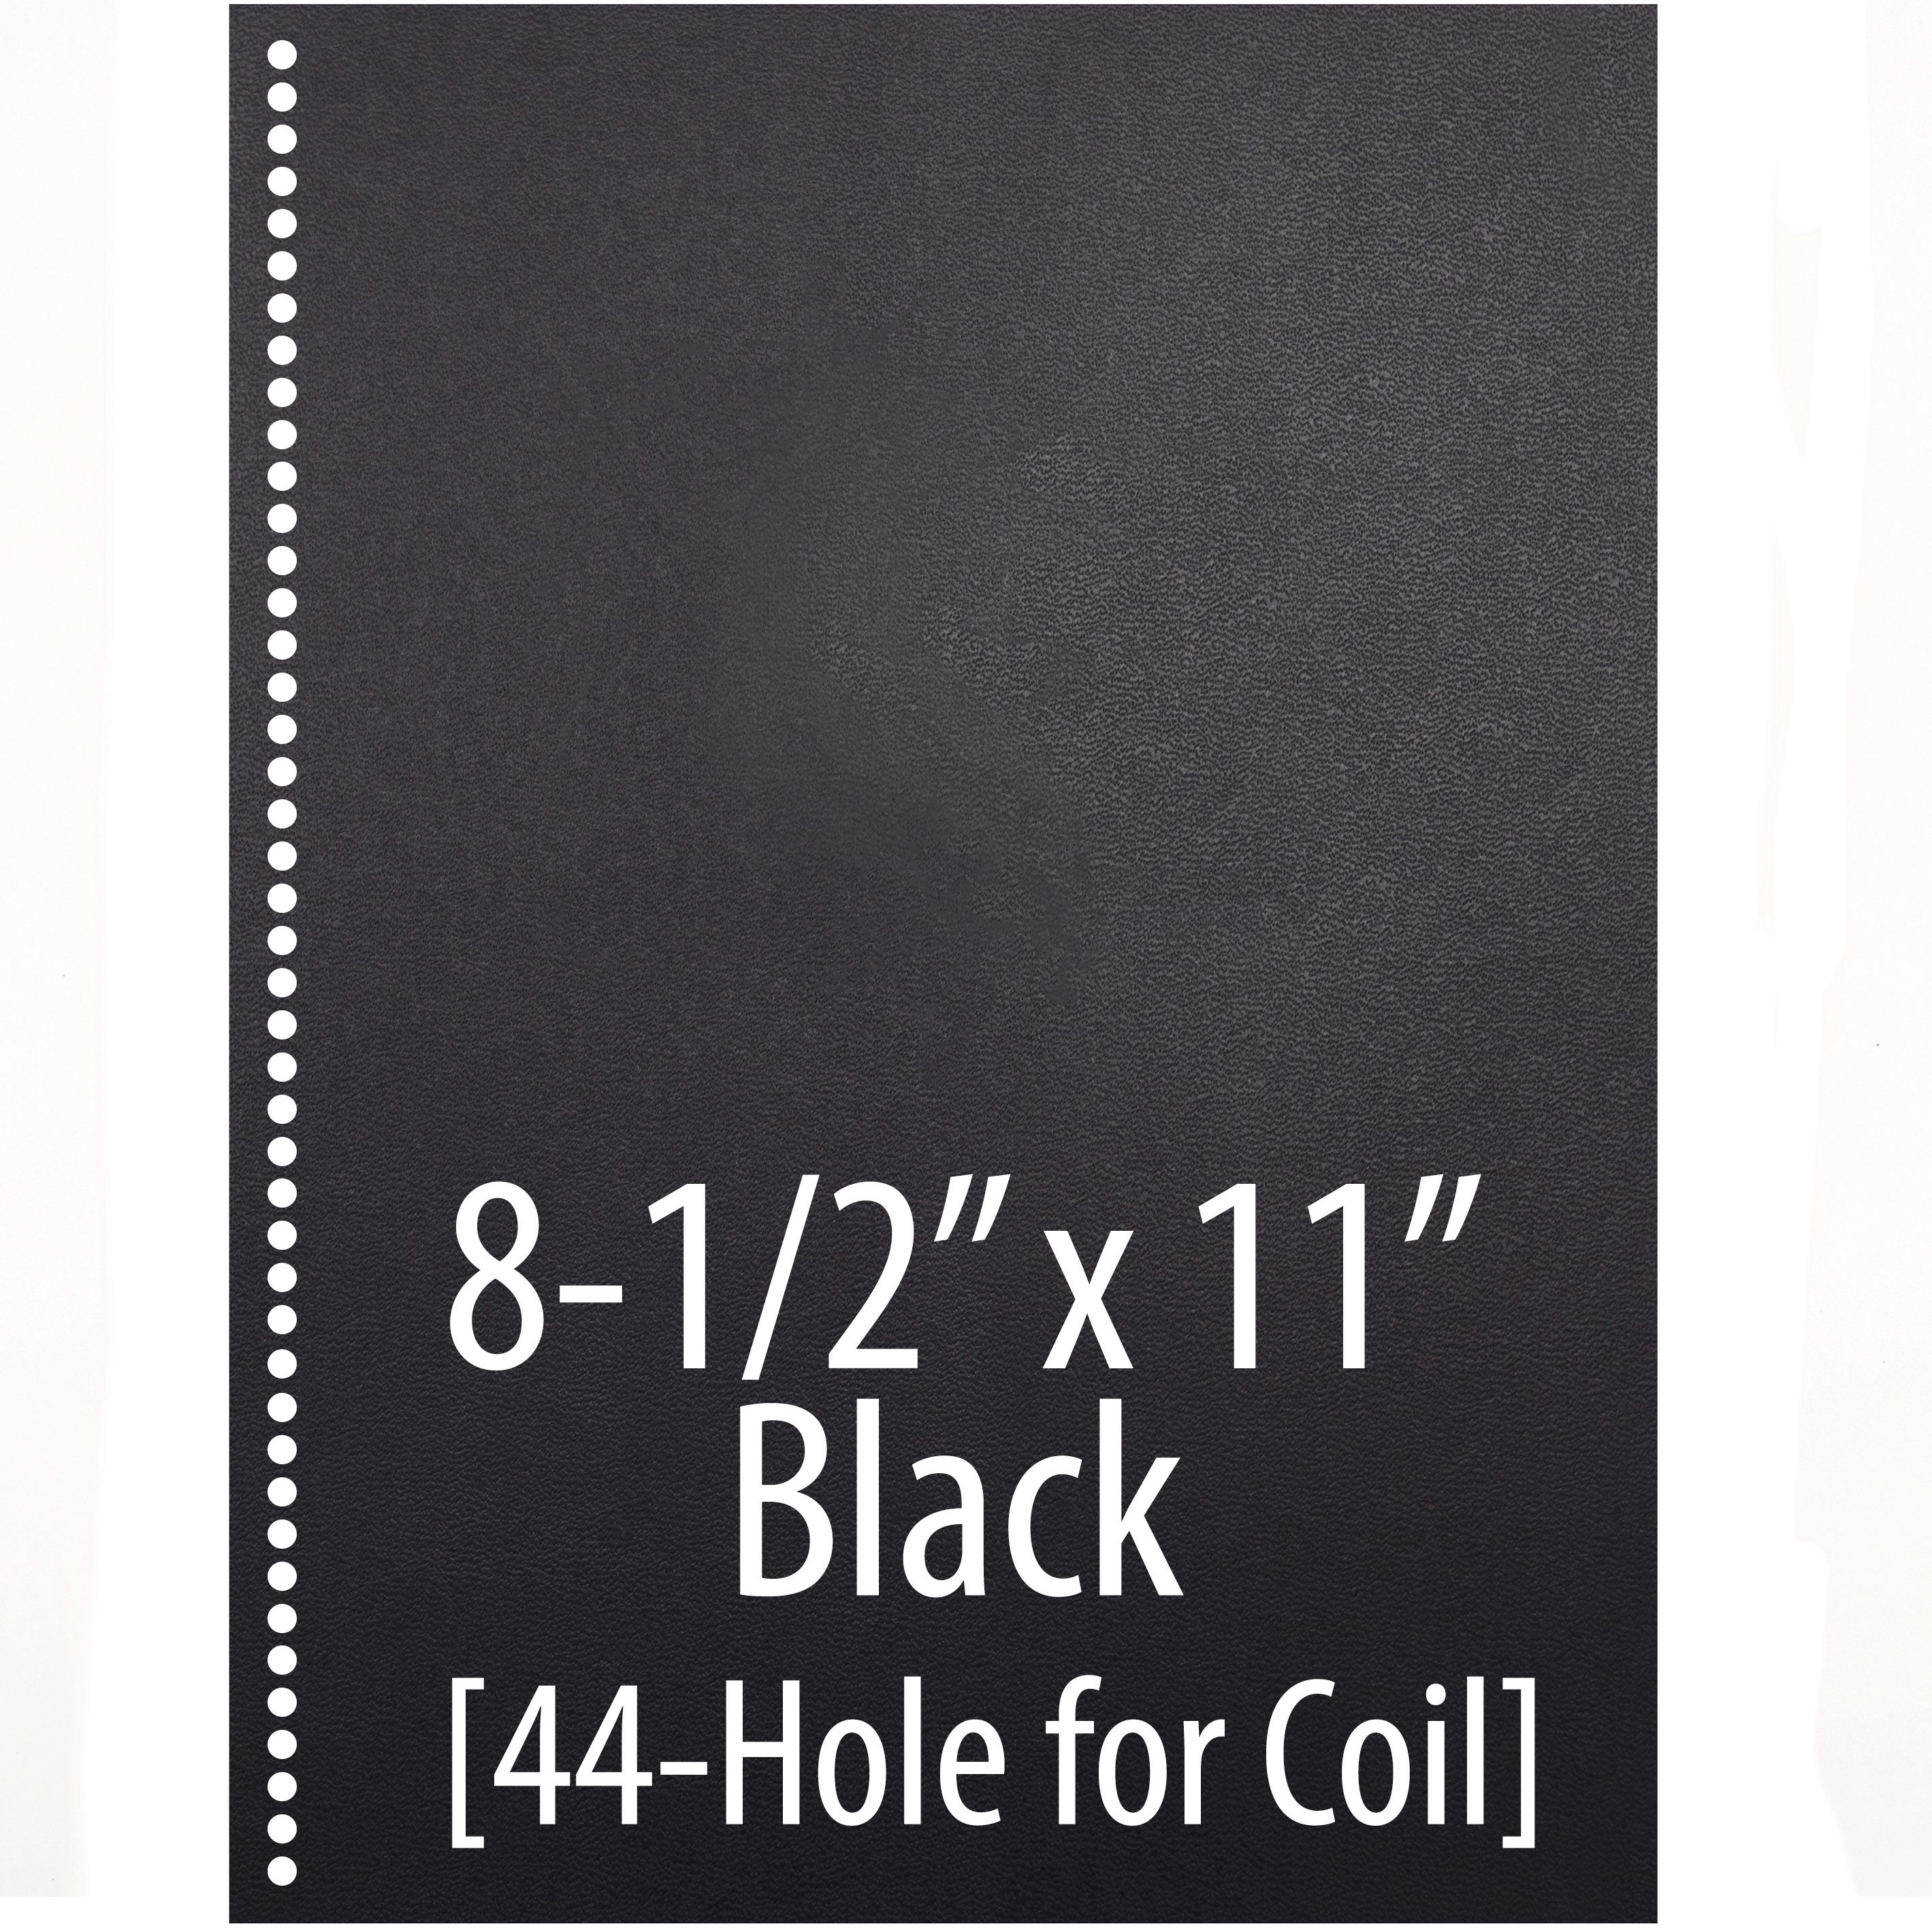 206 Composition Cover [No Window, Square Corner, Black, 44-hole (.248 Pitch), 8-1/2" X 11"] 100 /Pack